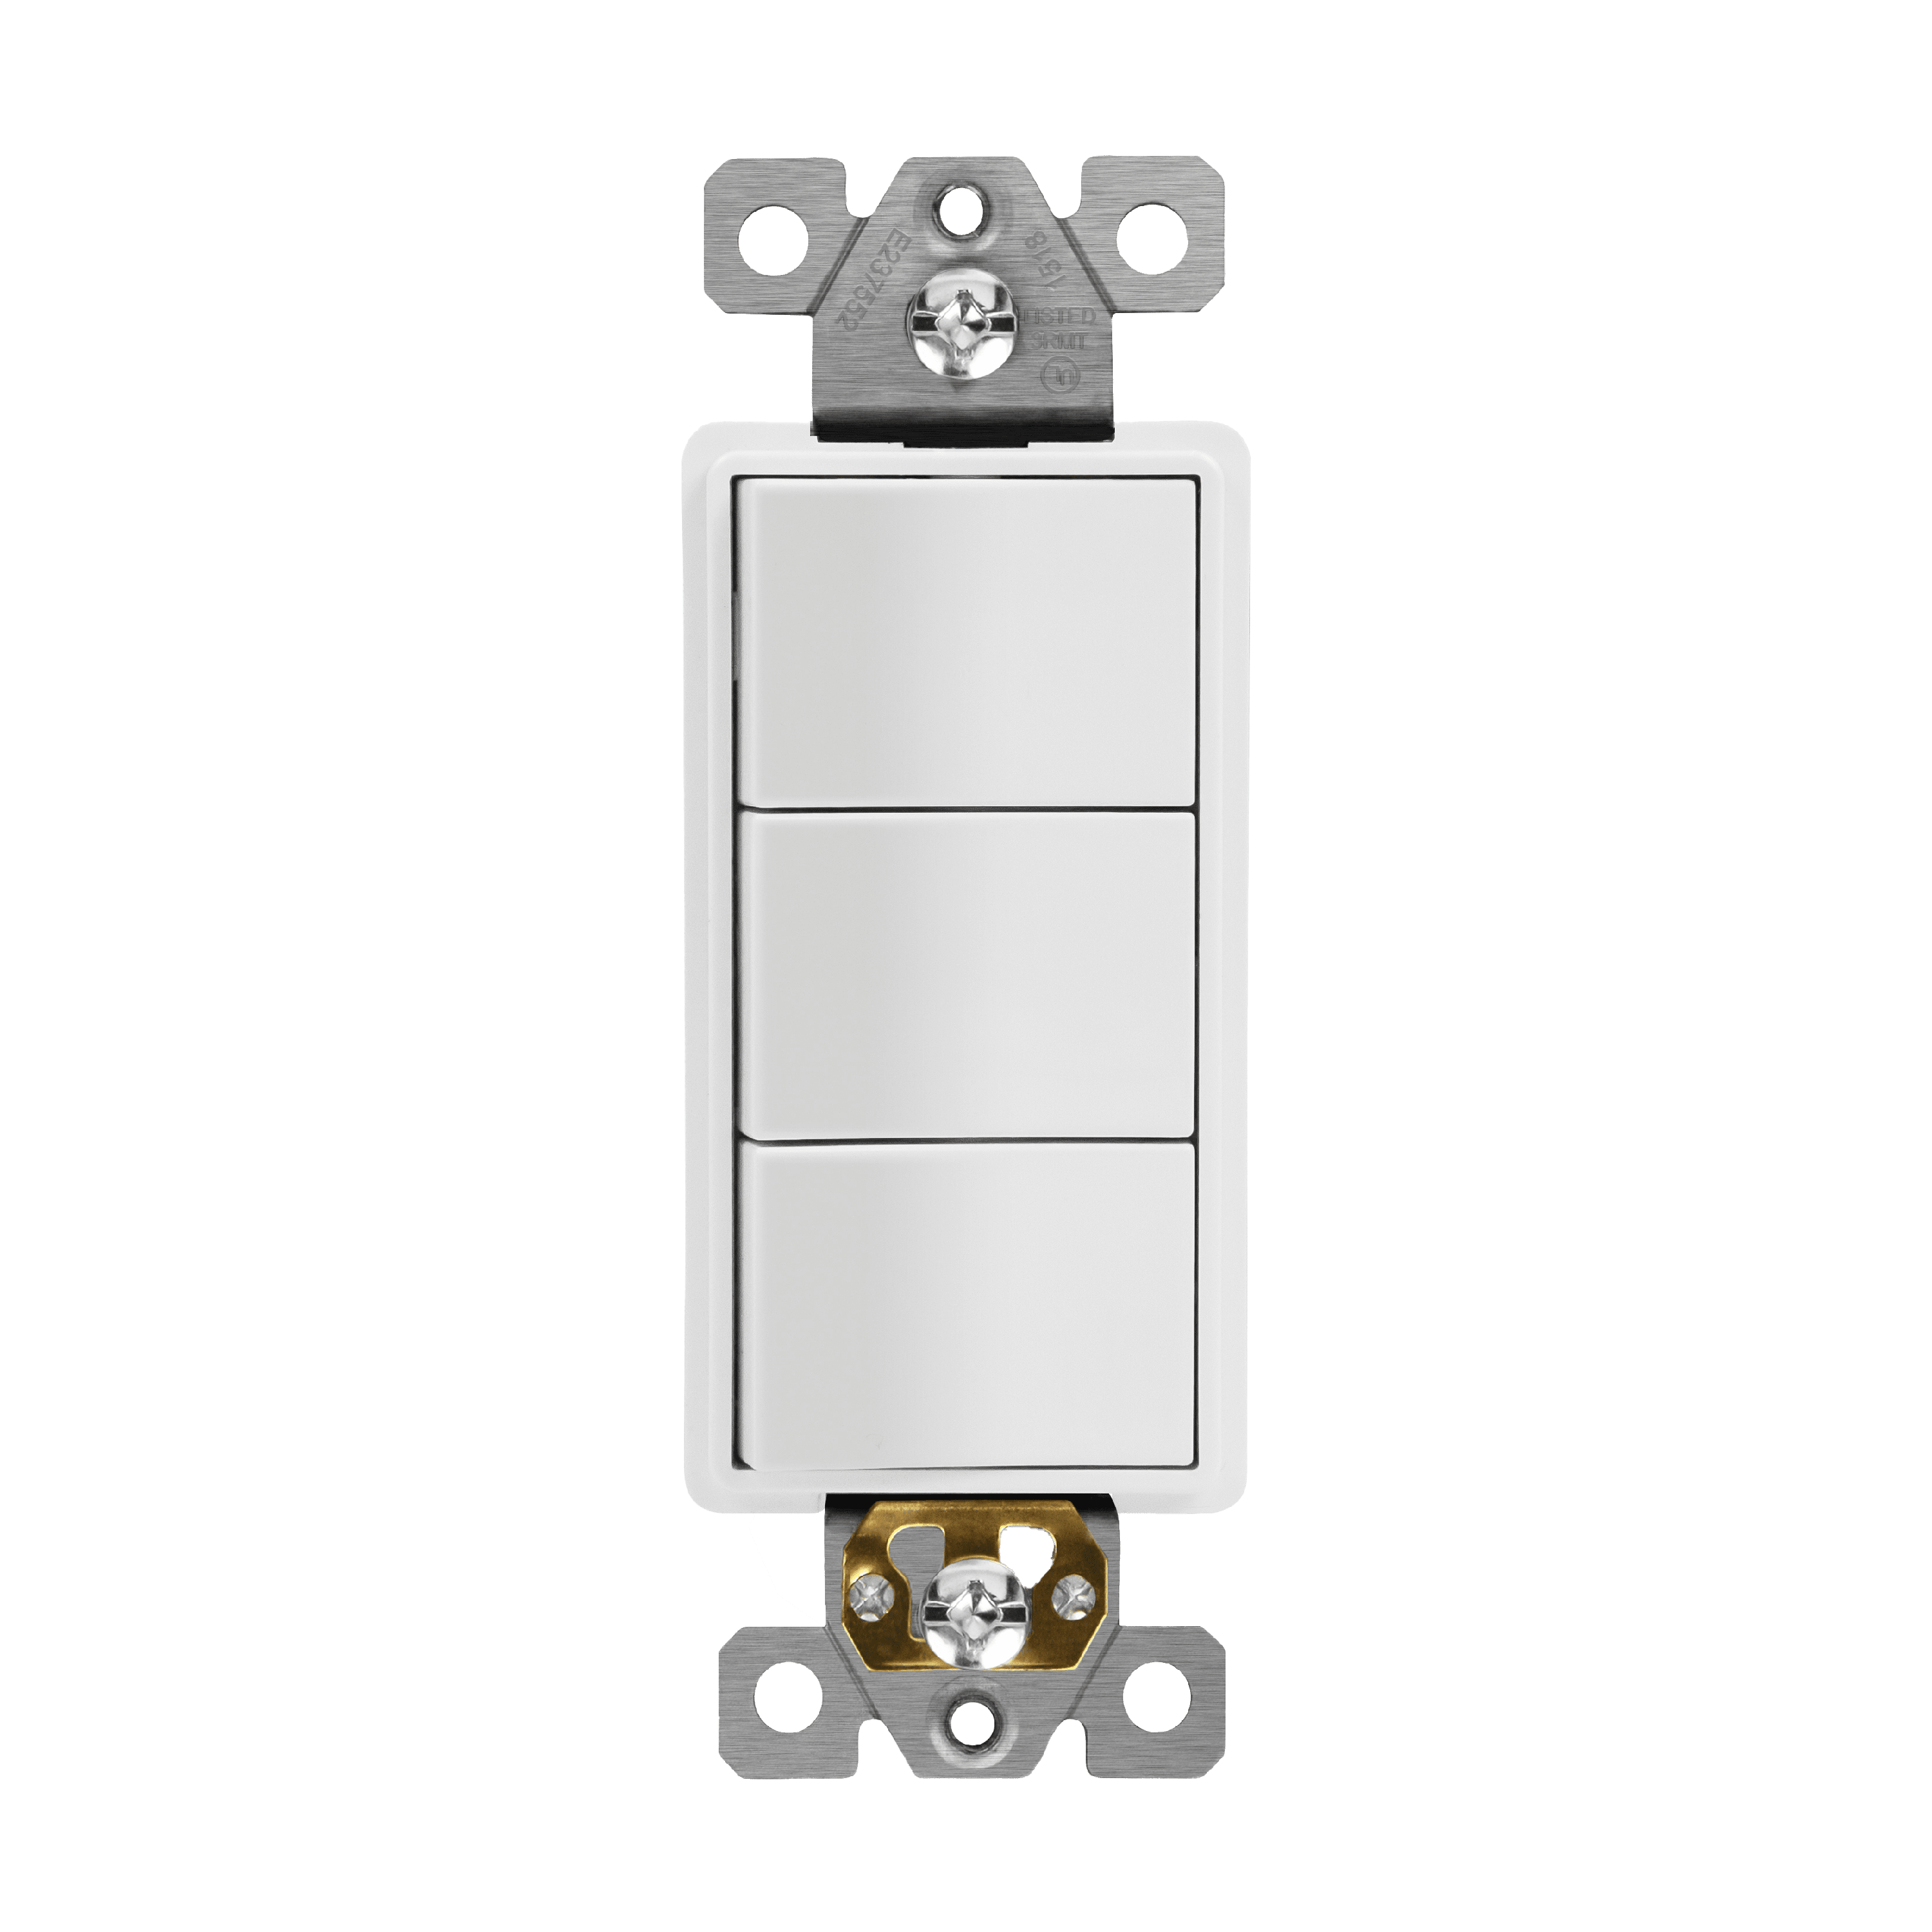 TOPGREENER Kalide Dual Load Dimmer Light Switch, Double LED Dimmer, Full  Range, Single Pole, 120VAC, 60Hz, 200W LED/CFL, Neutral Wire Not Required